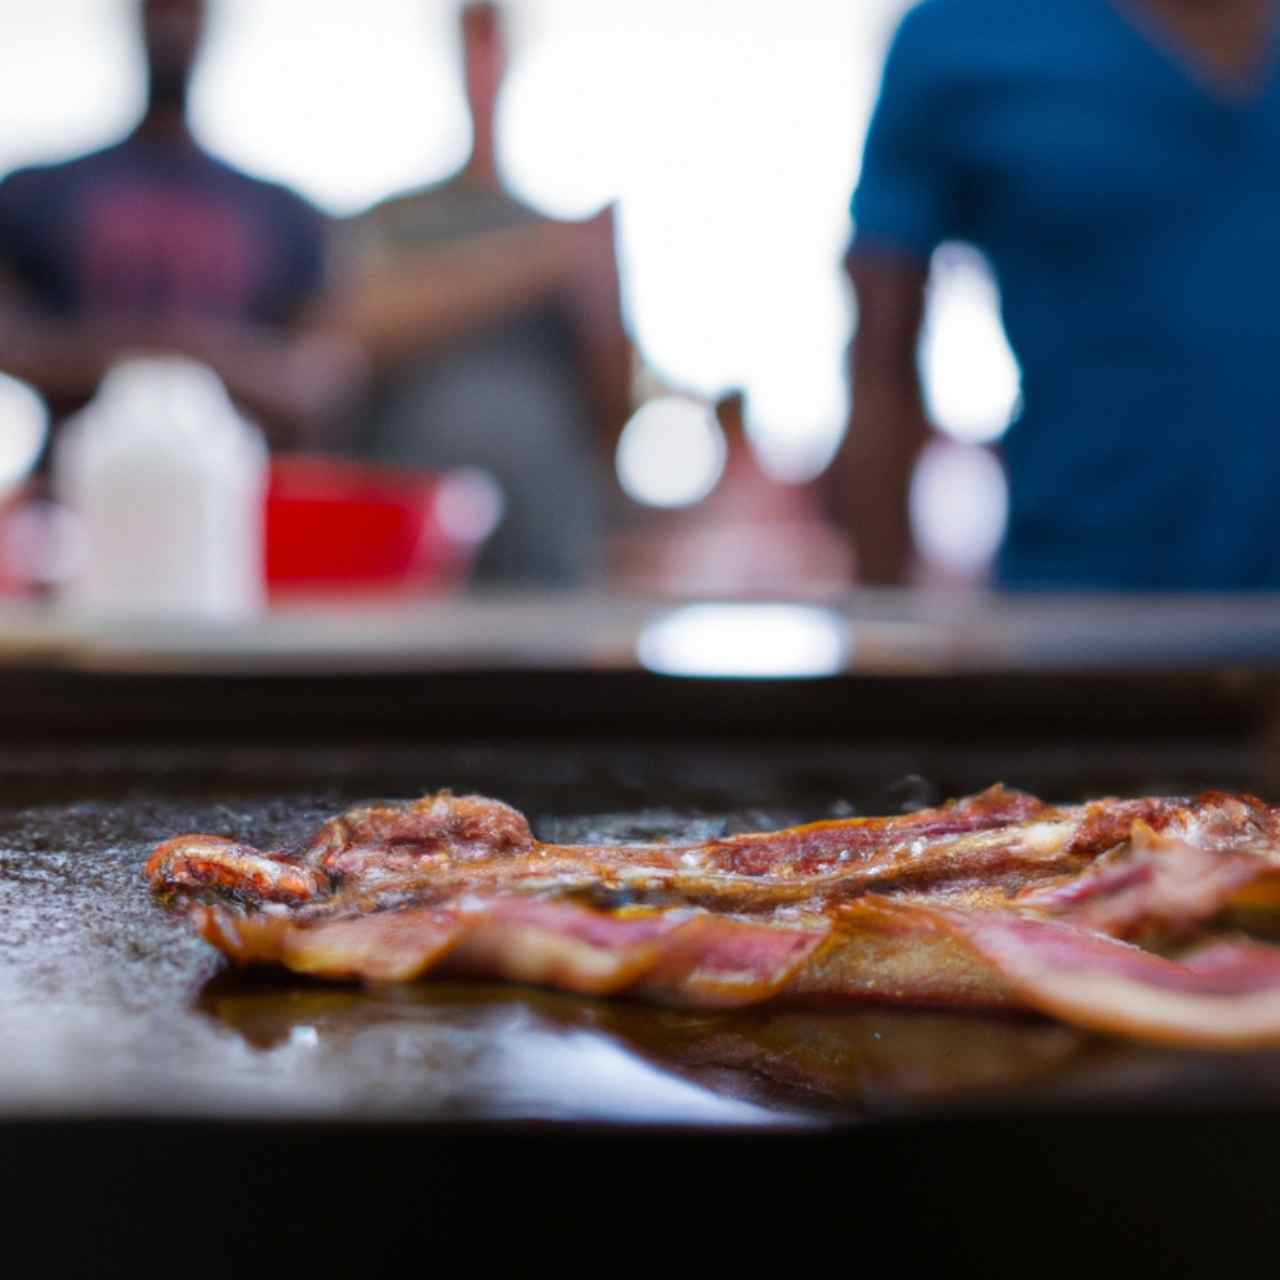 How To Reheat Bacon on a Griddle